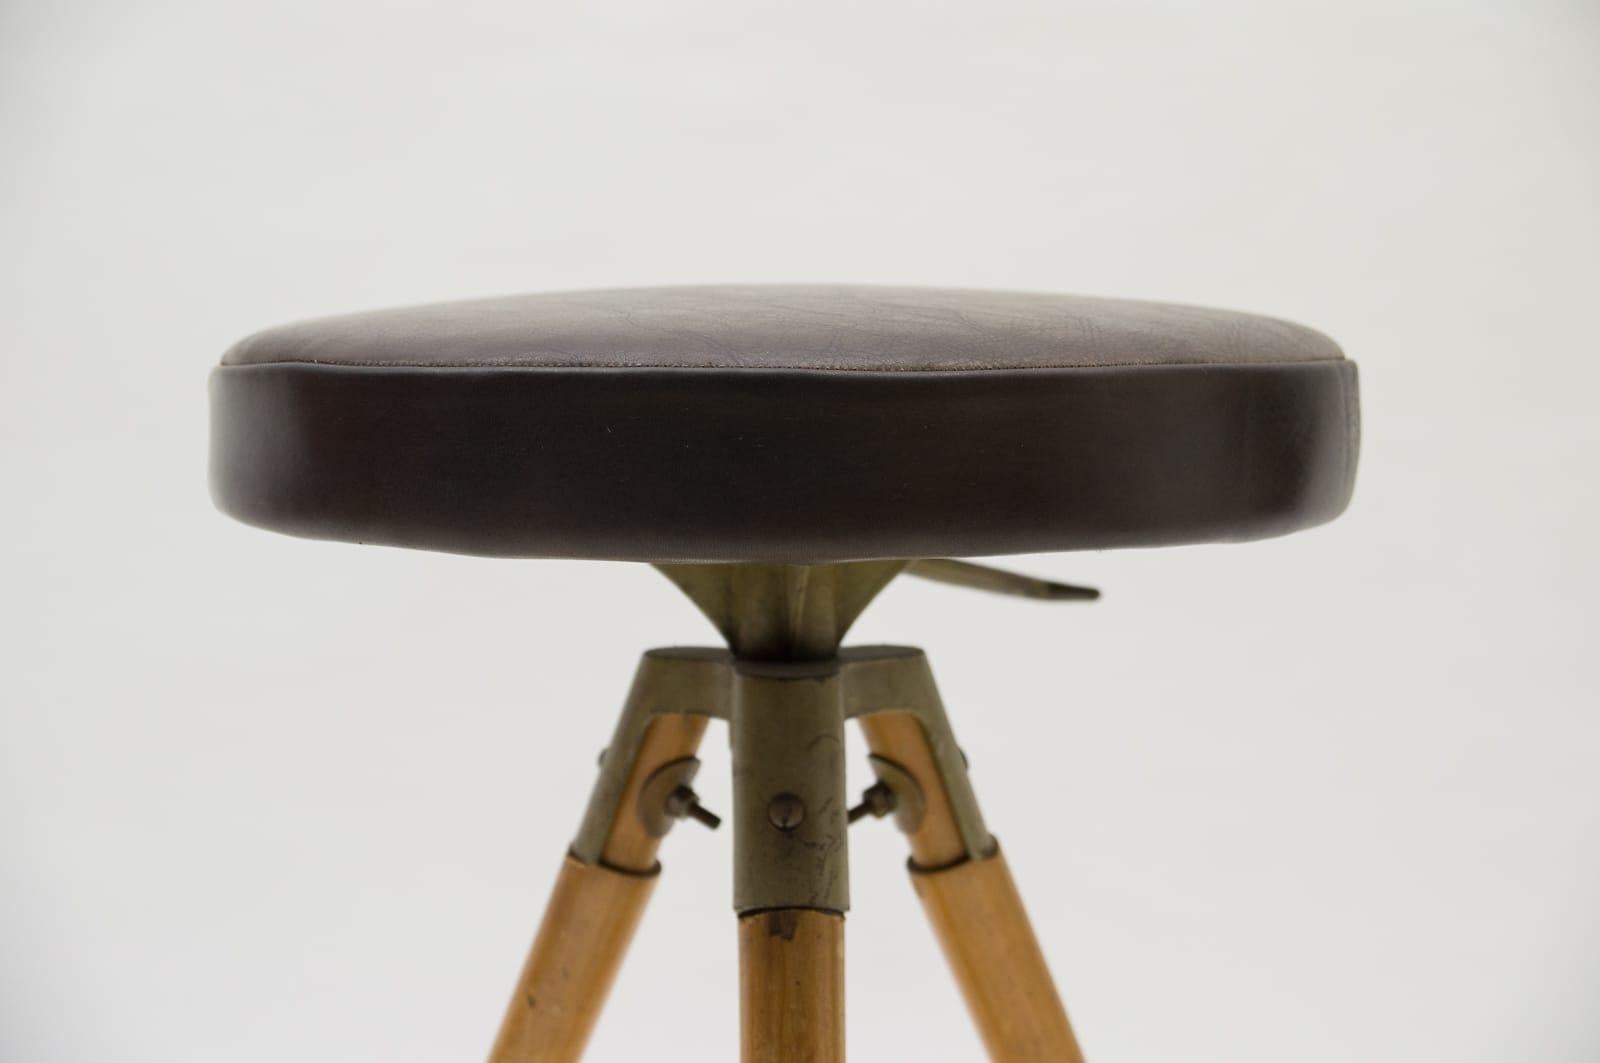 Mid-Century Modern Adjustable Swiss Stool in Leather Metal and Wood, 1940s/50s For Sale 2